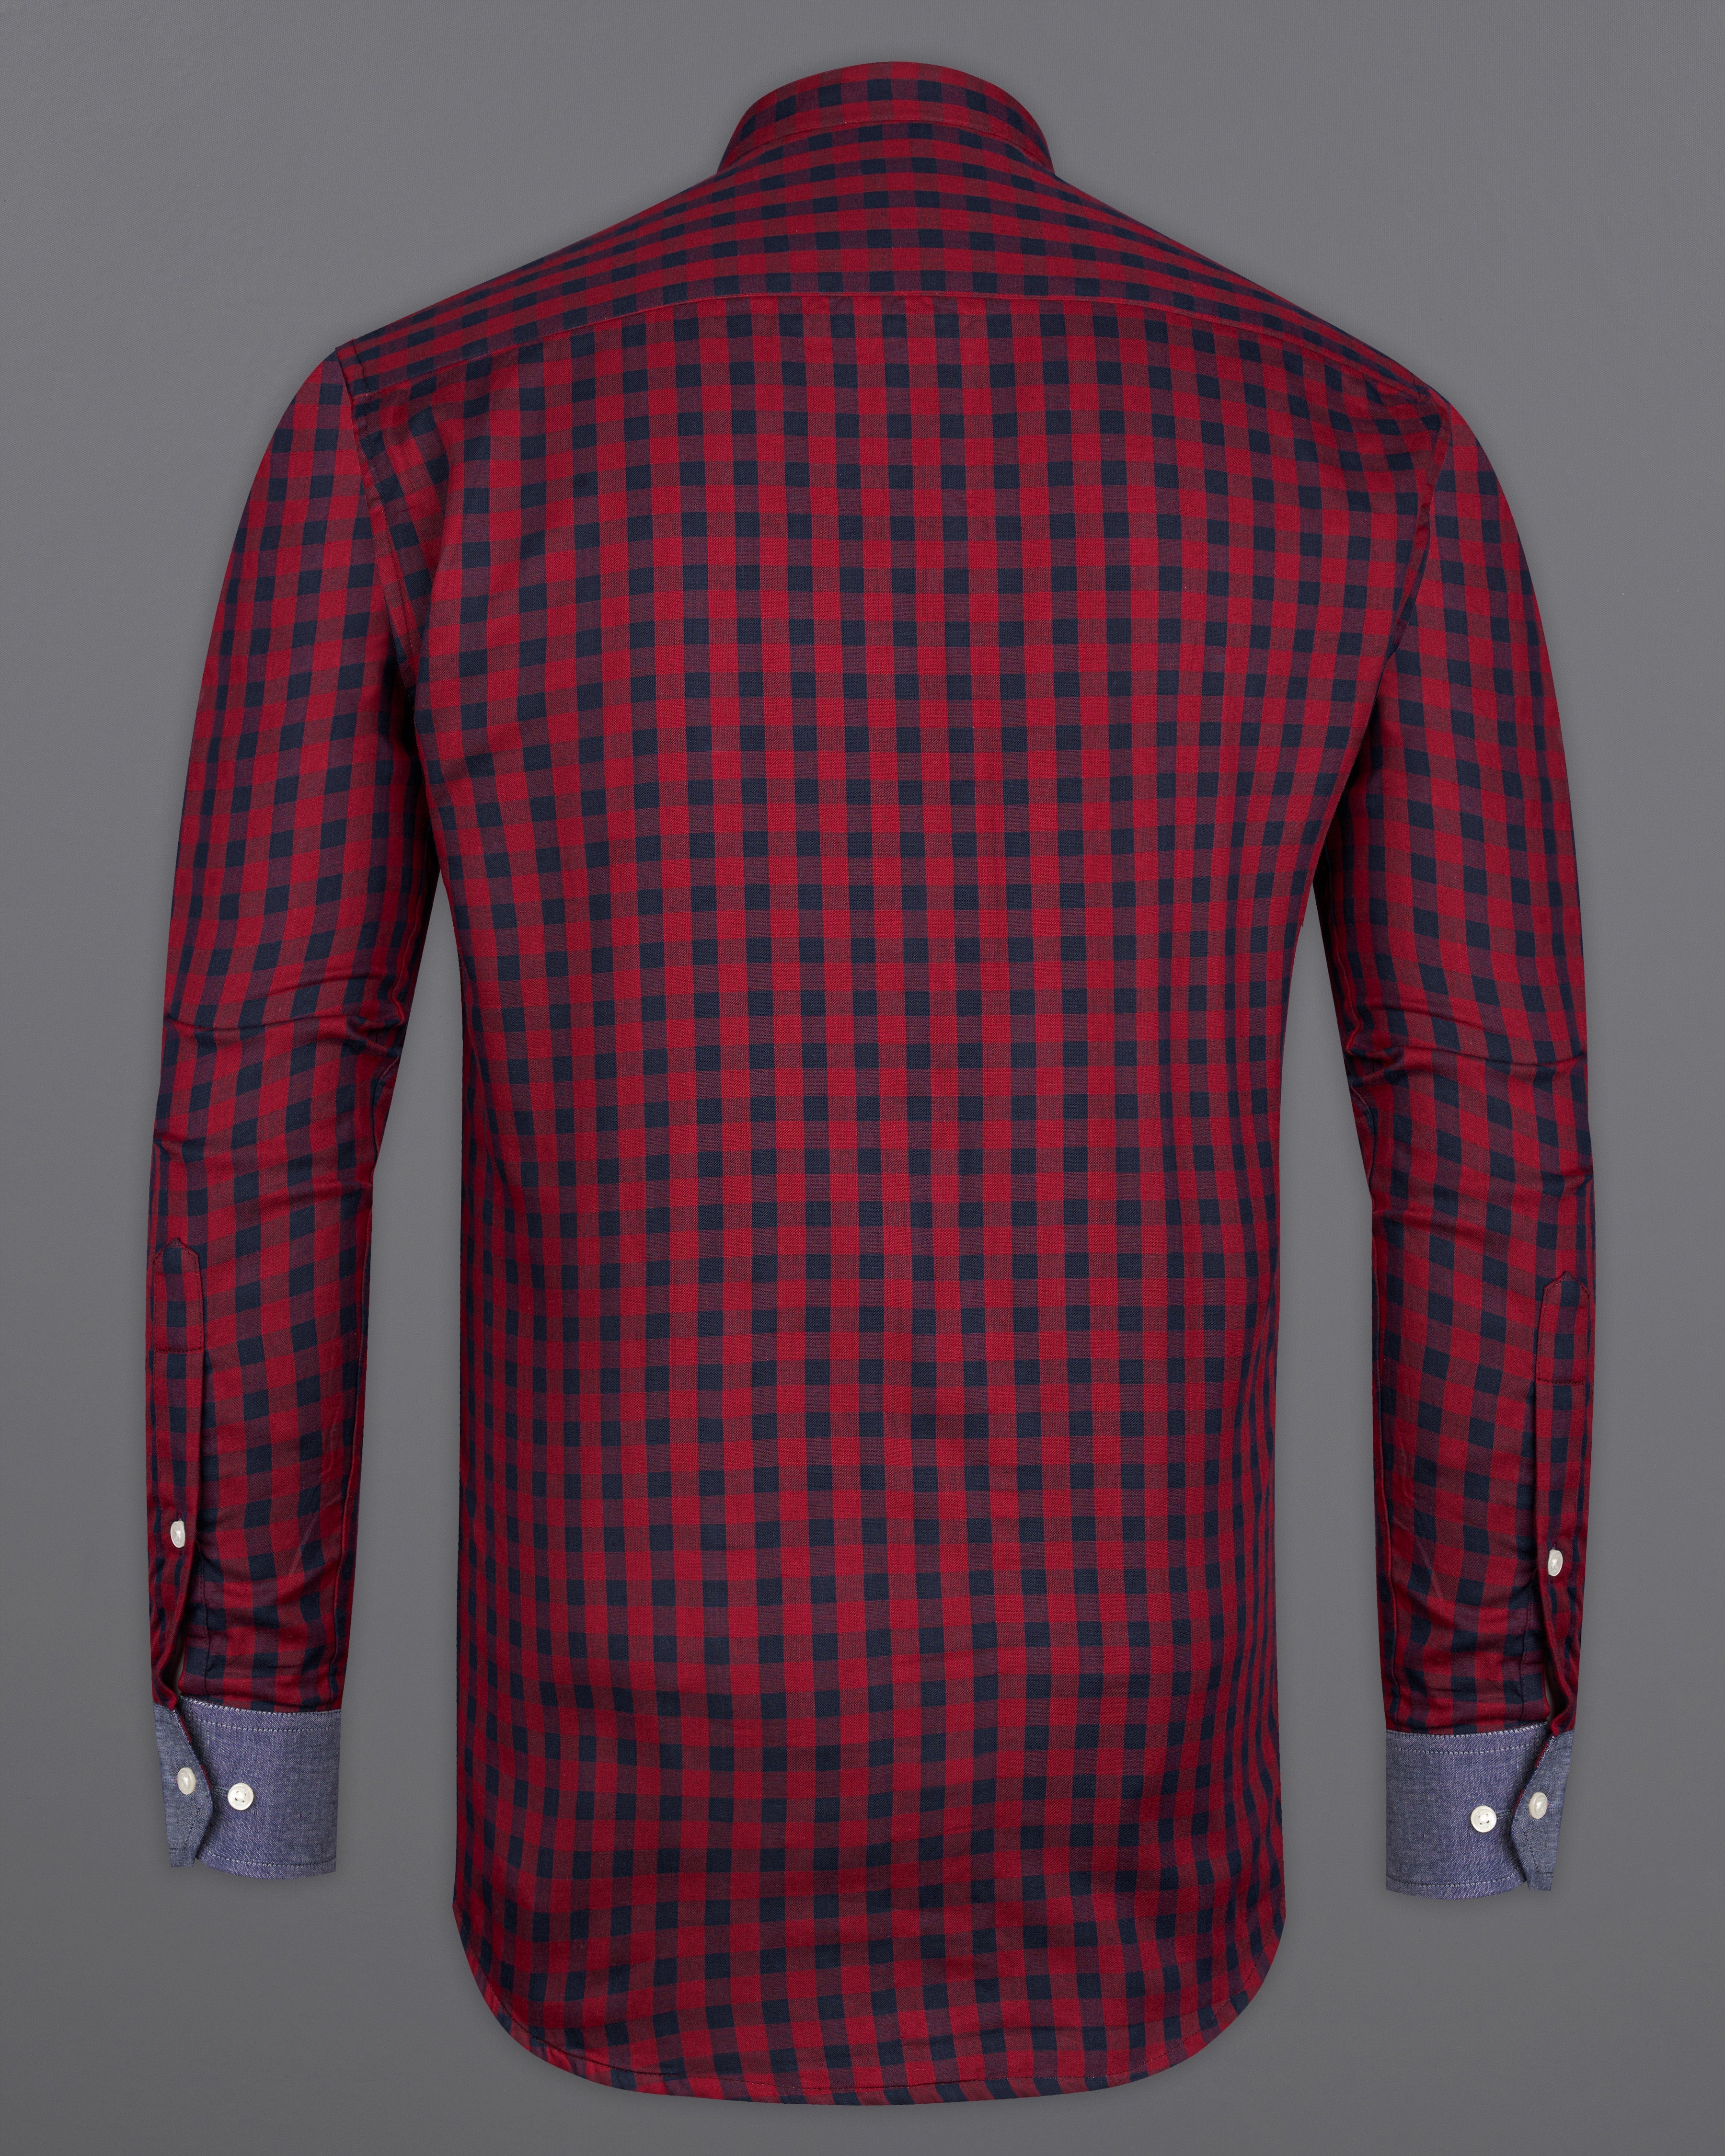 Merlot Red Checkered with River Bed Gray Patchwork Chambray Designer Shirt 9996-M-P251-38, 9996-M-P251-H-38, 9996-M-P251-39, 9996-M-P251-H-39, 9996-M-P251-40, 9996-M-P251-H-40, 9996-M-P251-42, 9996-M-P251-H-42, 9996-M-P251-44, 9996-M-P251-H-44, 9996-M-P251-46, 9996-M-P251-H-46, 9996-M-P251-48, 9996-M-P251-H-48, 9996-M-P251-50, 9996-M-P251-H-50, 9996-M-P251-52, 9996-M-P251-H-52